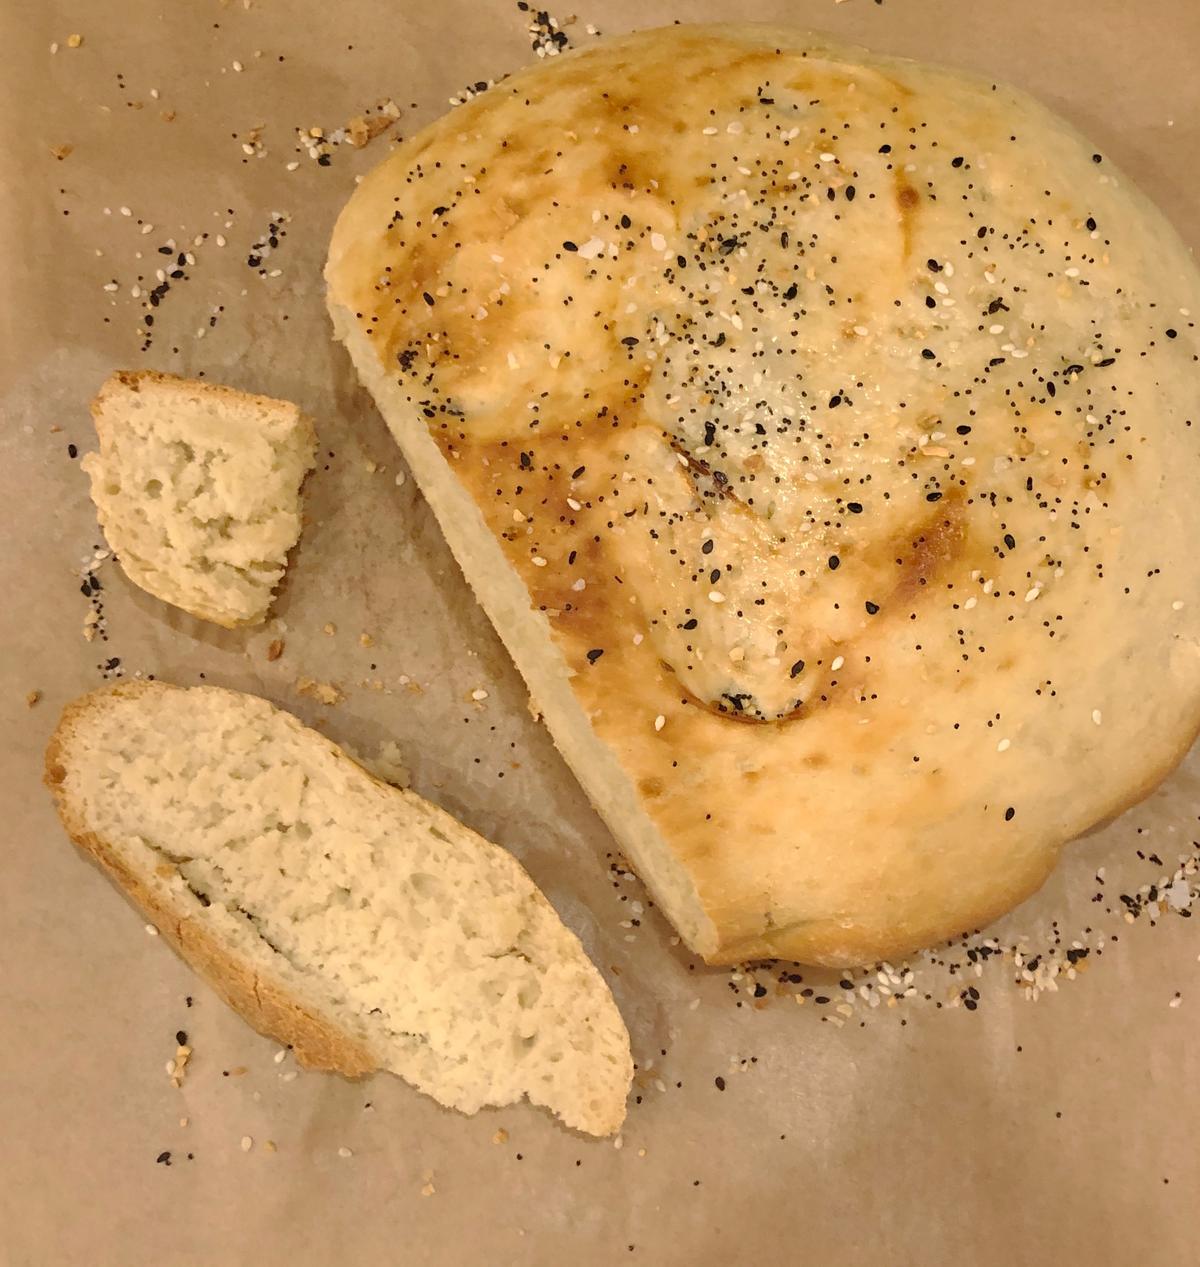 For novice bread makers, this slow-cooker version is a great entry point. (Nicole Hvidsten/Minneapolis Star Tribune/TNS)